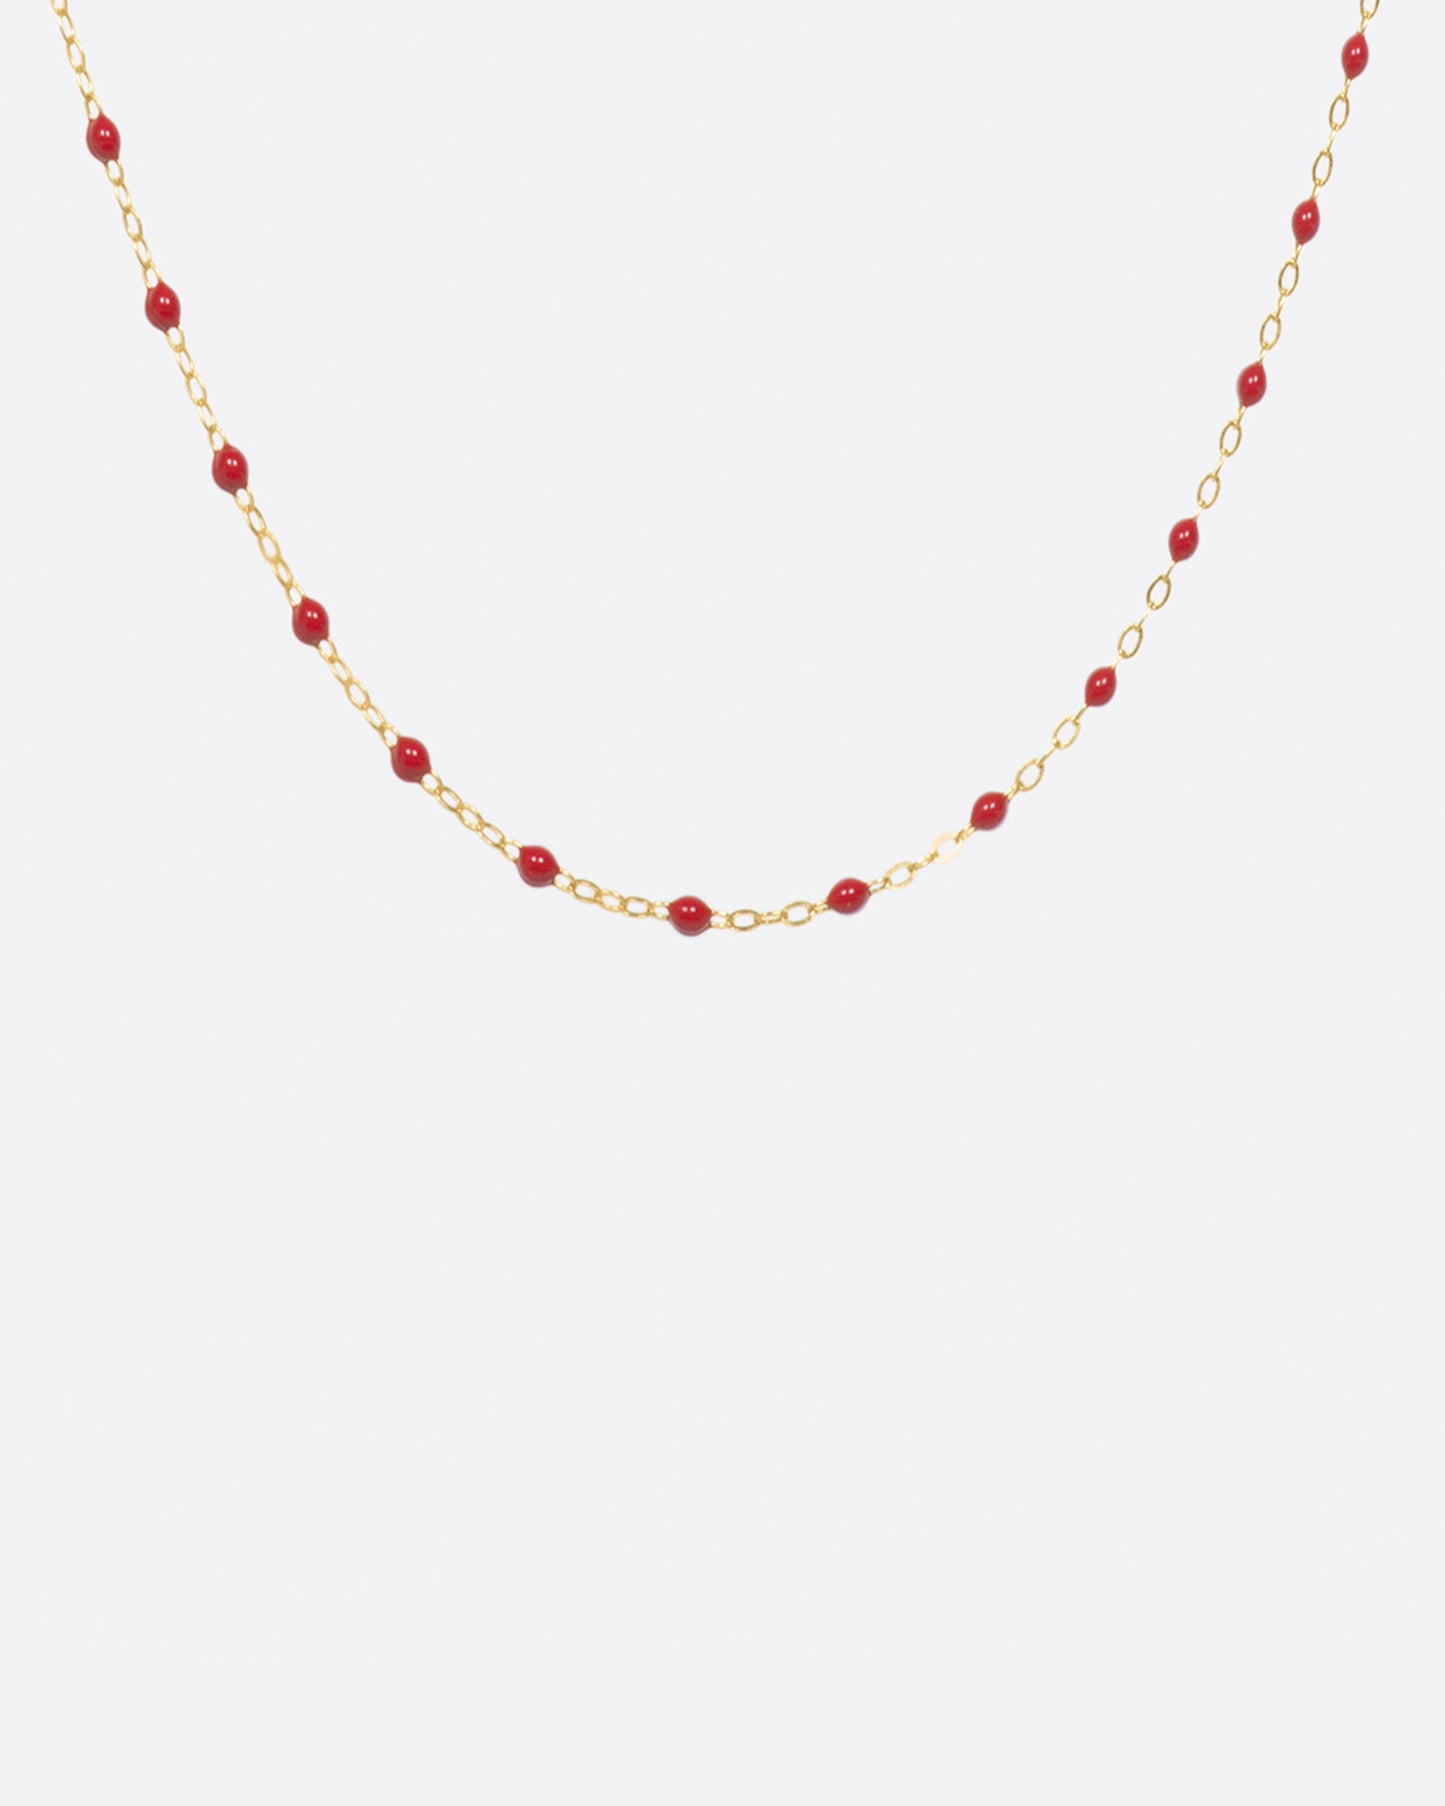 Thin 18k yellow gold chain necklace with resin beads, shown in a 16 inch length